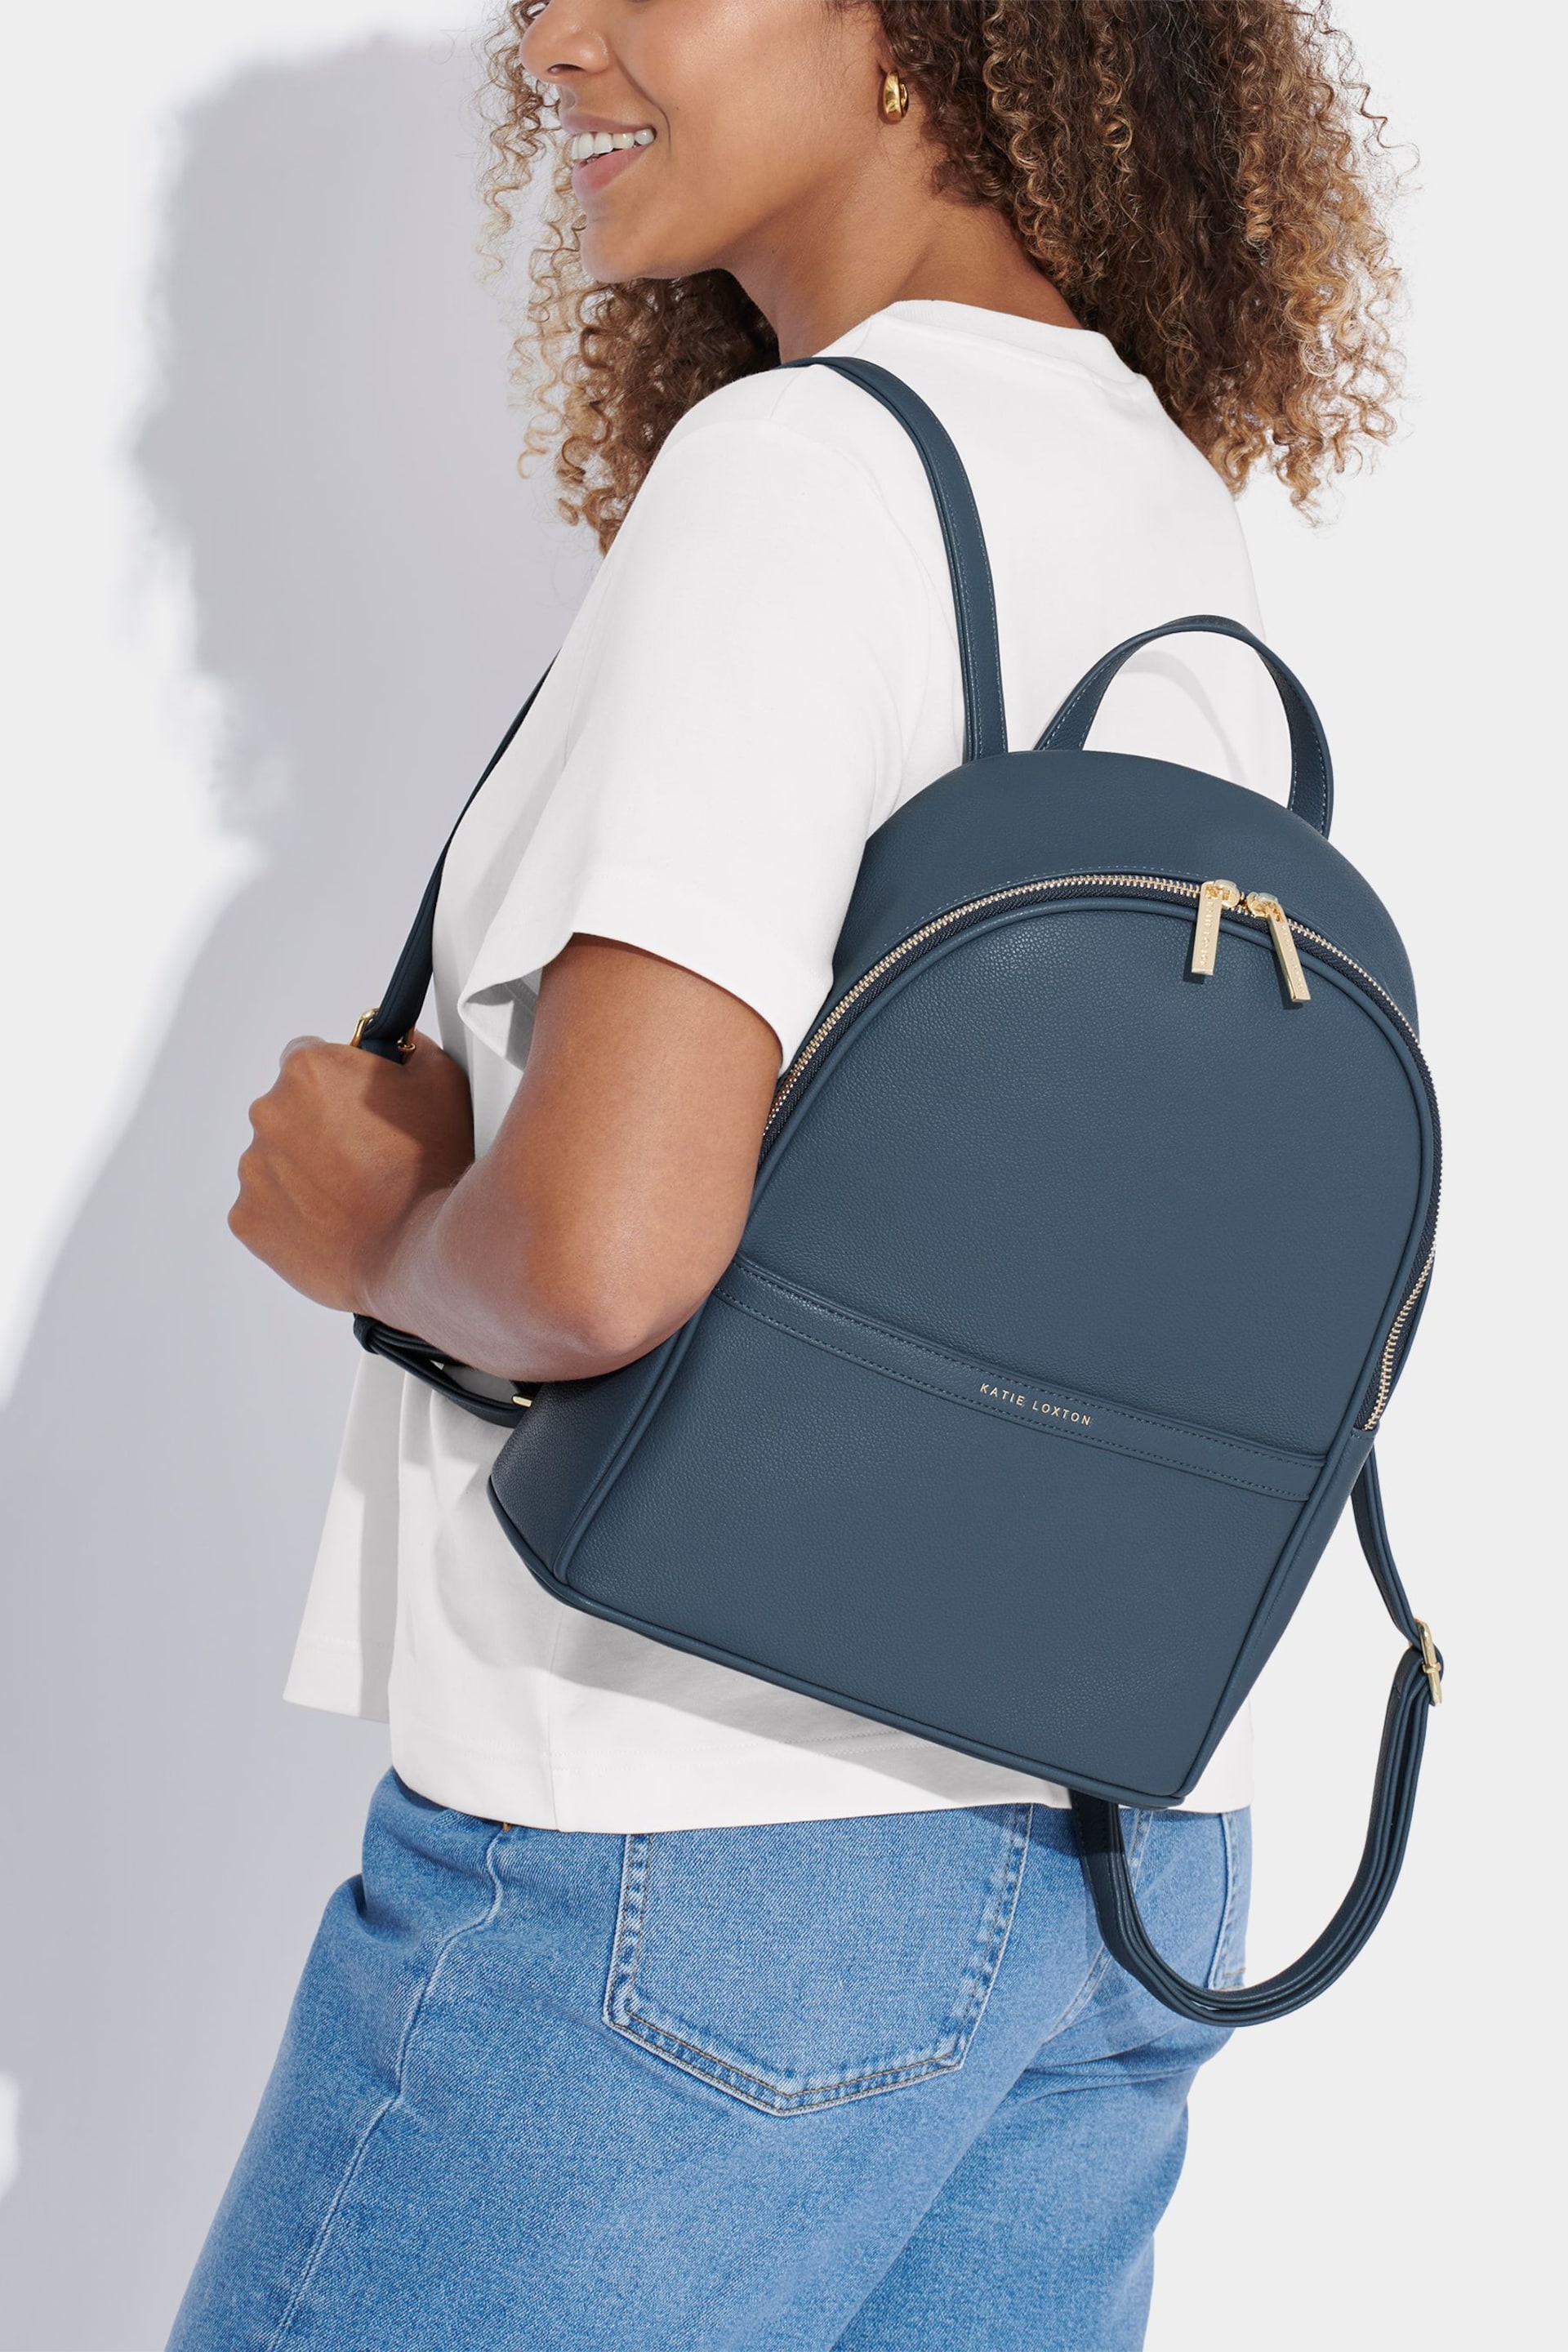 Katie Loxton Blue Cleo Large Backpack - Image 1 of 4